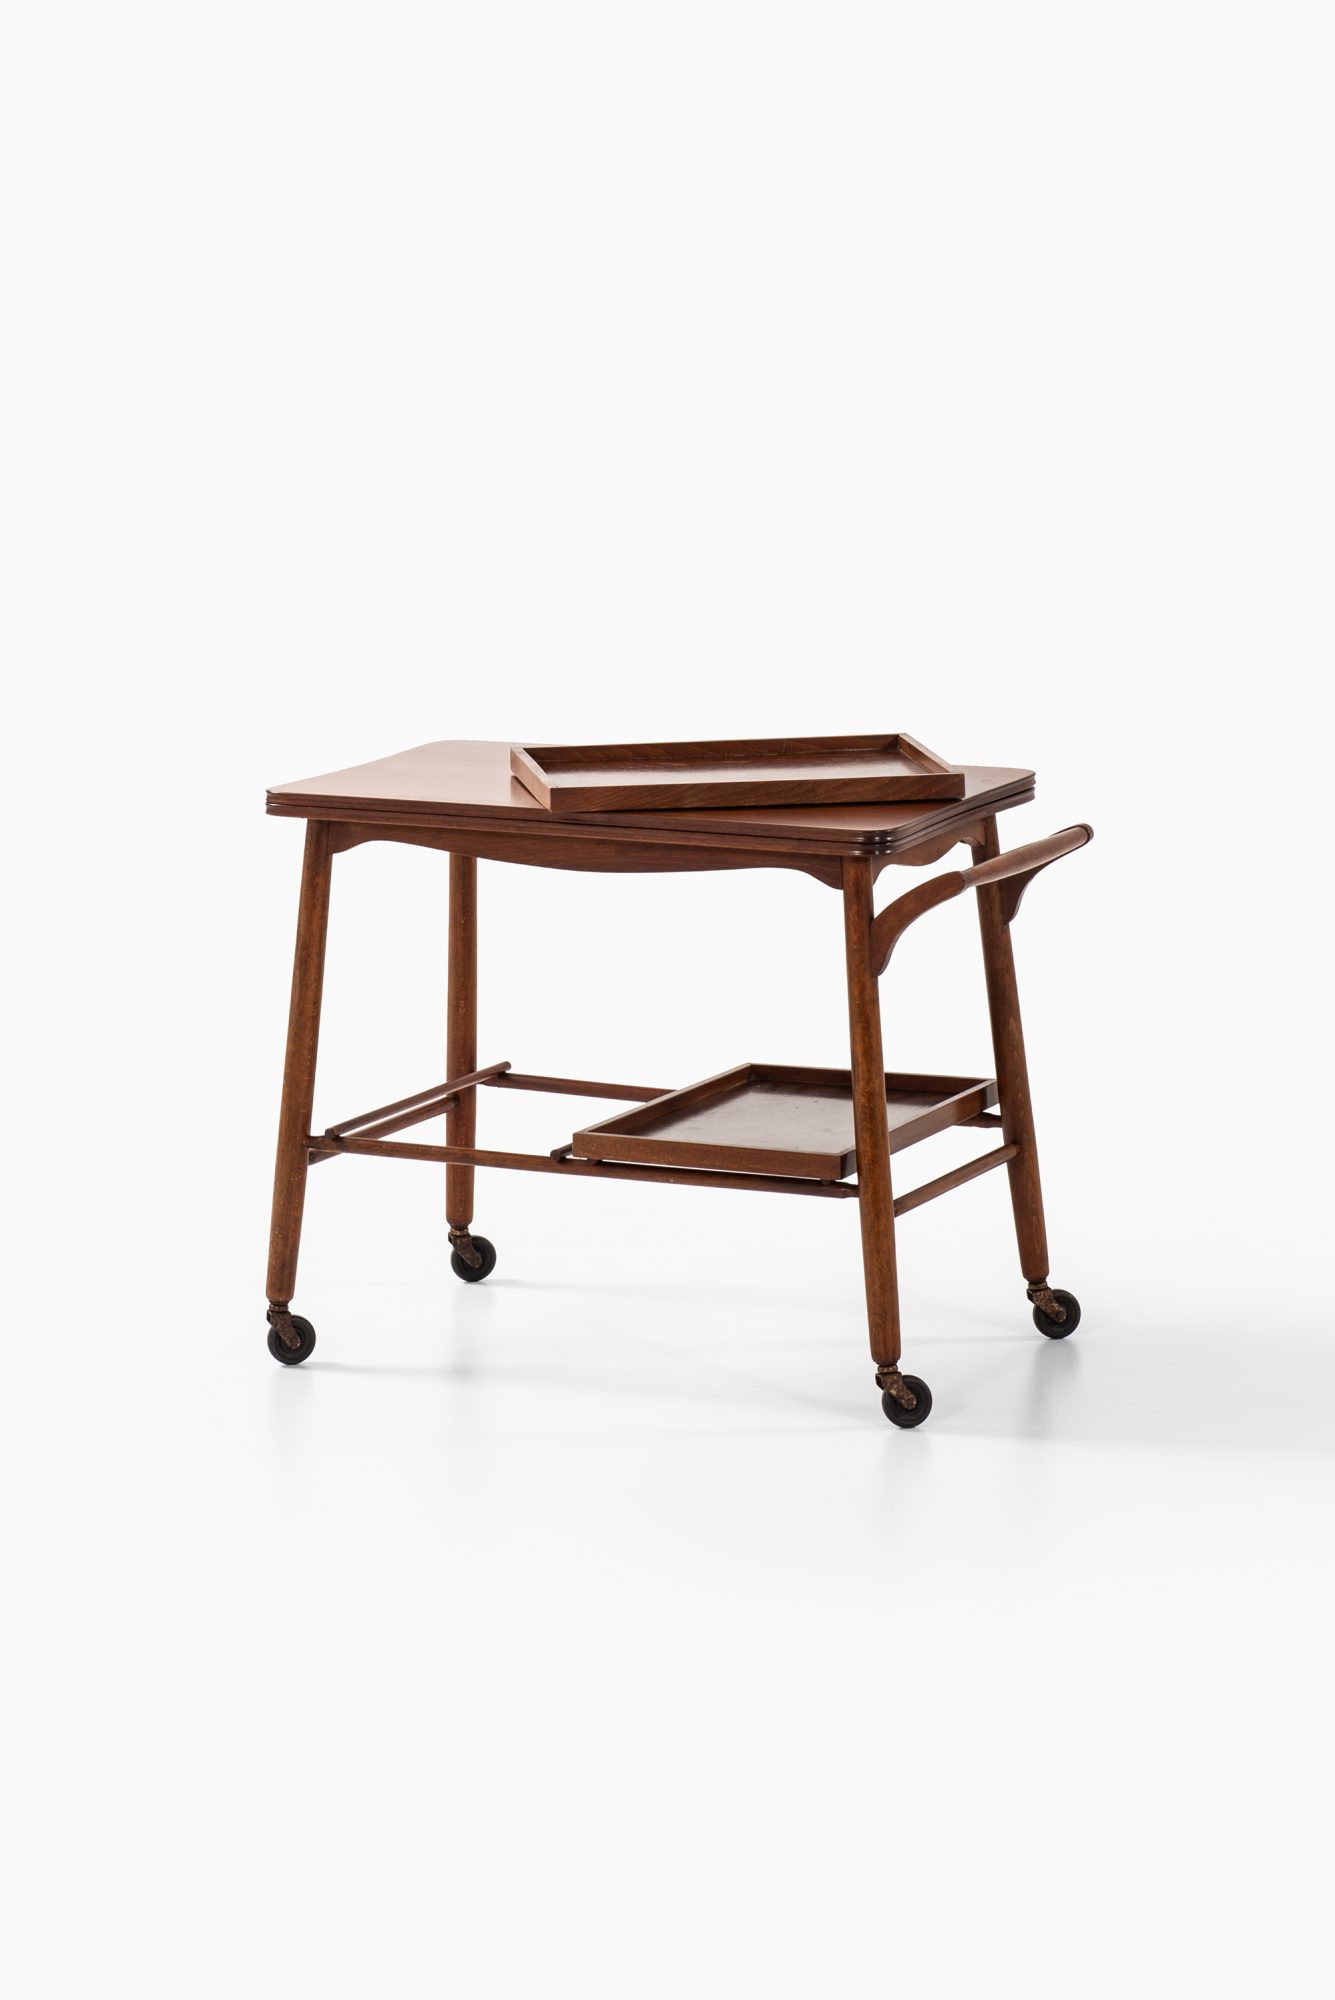 Frode Holm trolley in mahogany and brass at Studio Schalling